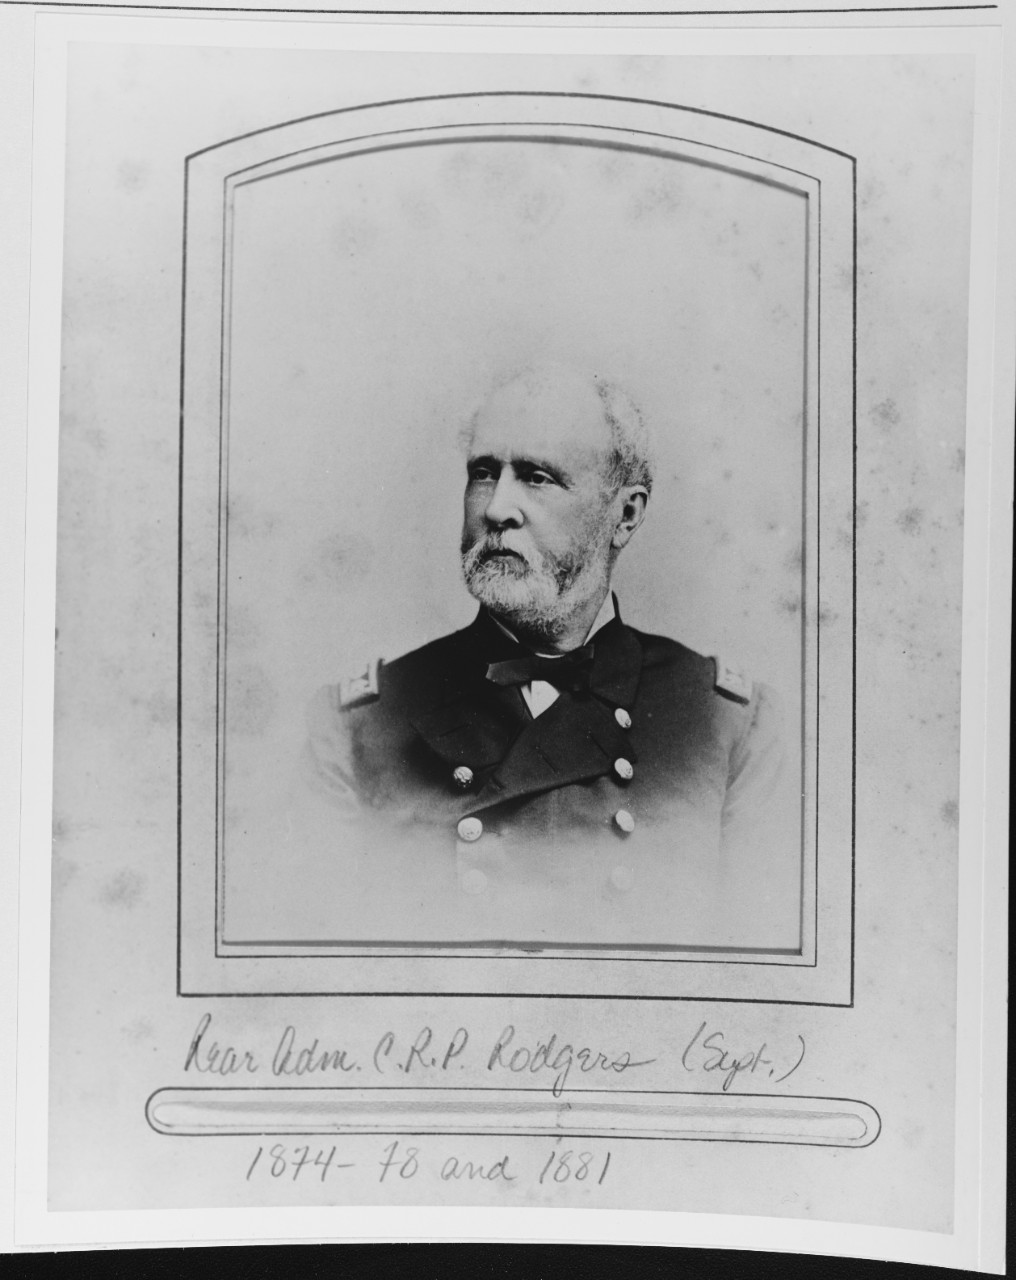 Rear Admiral Christopher R. Perry Rodgers, USN